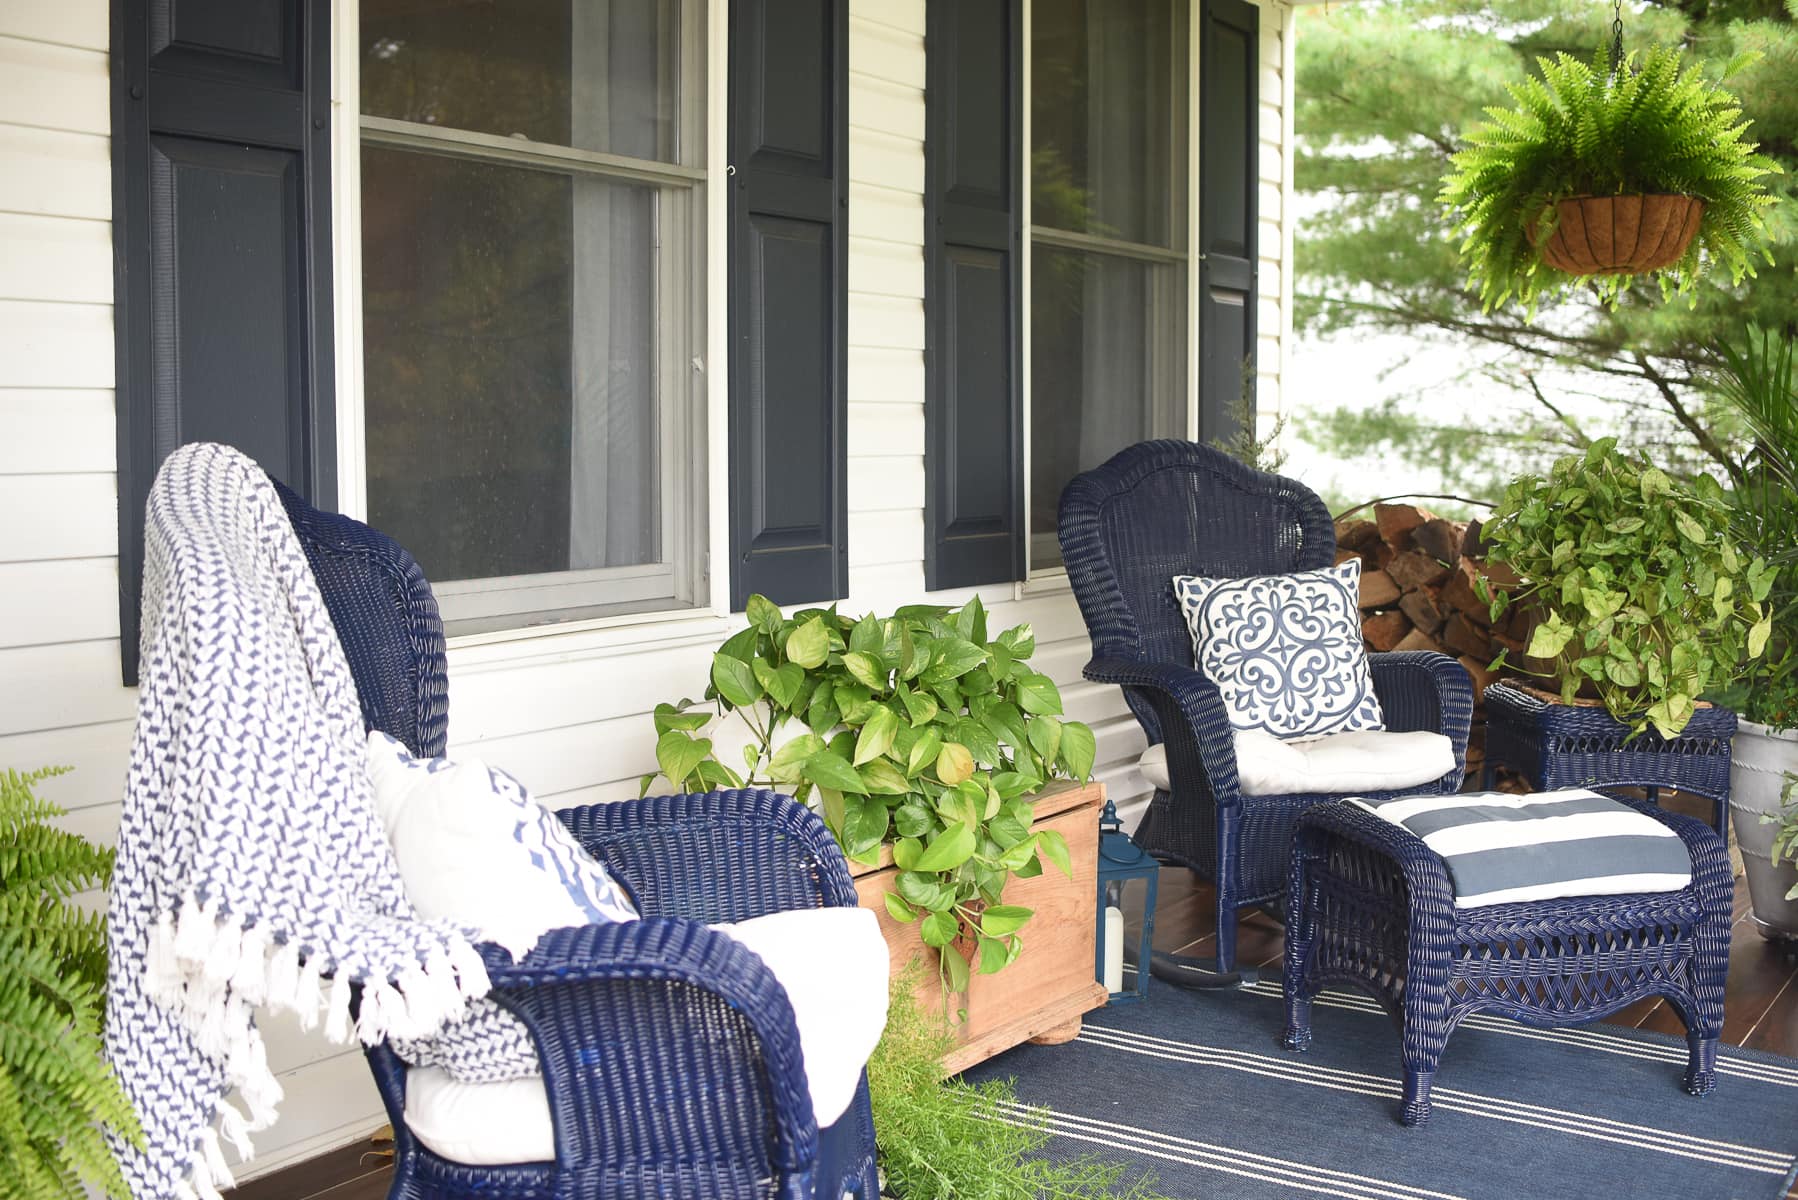 The front porch on this New Jersey colonial style home